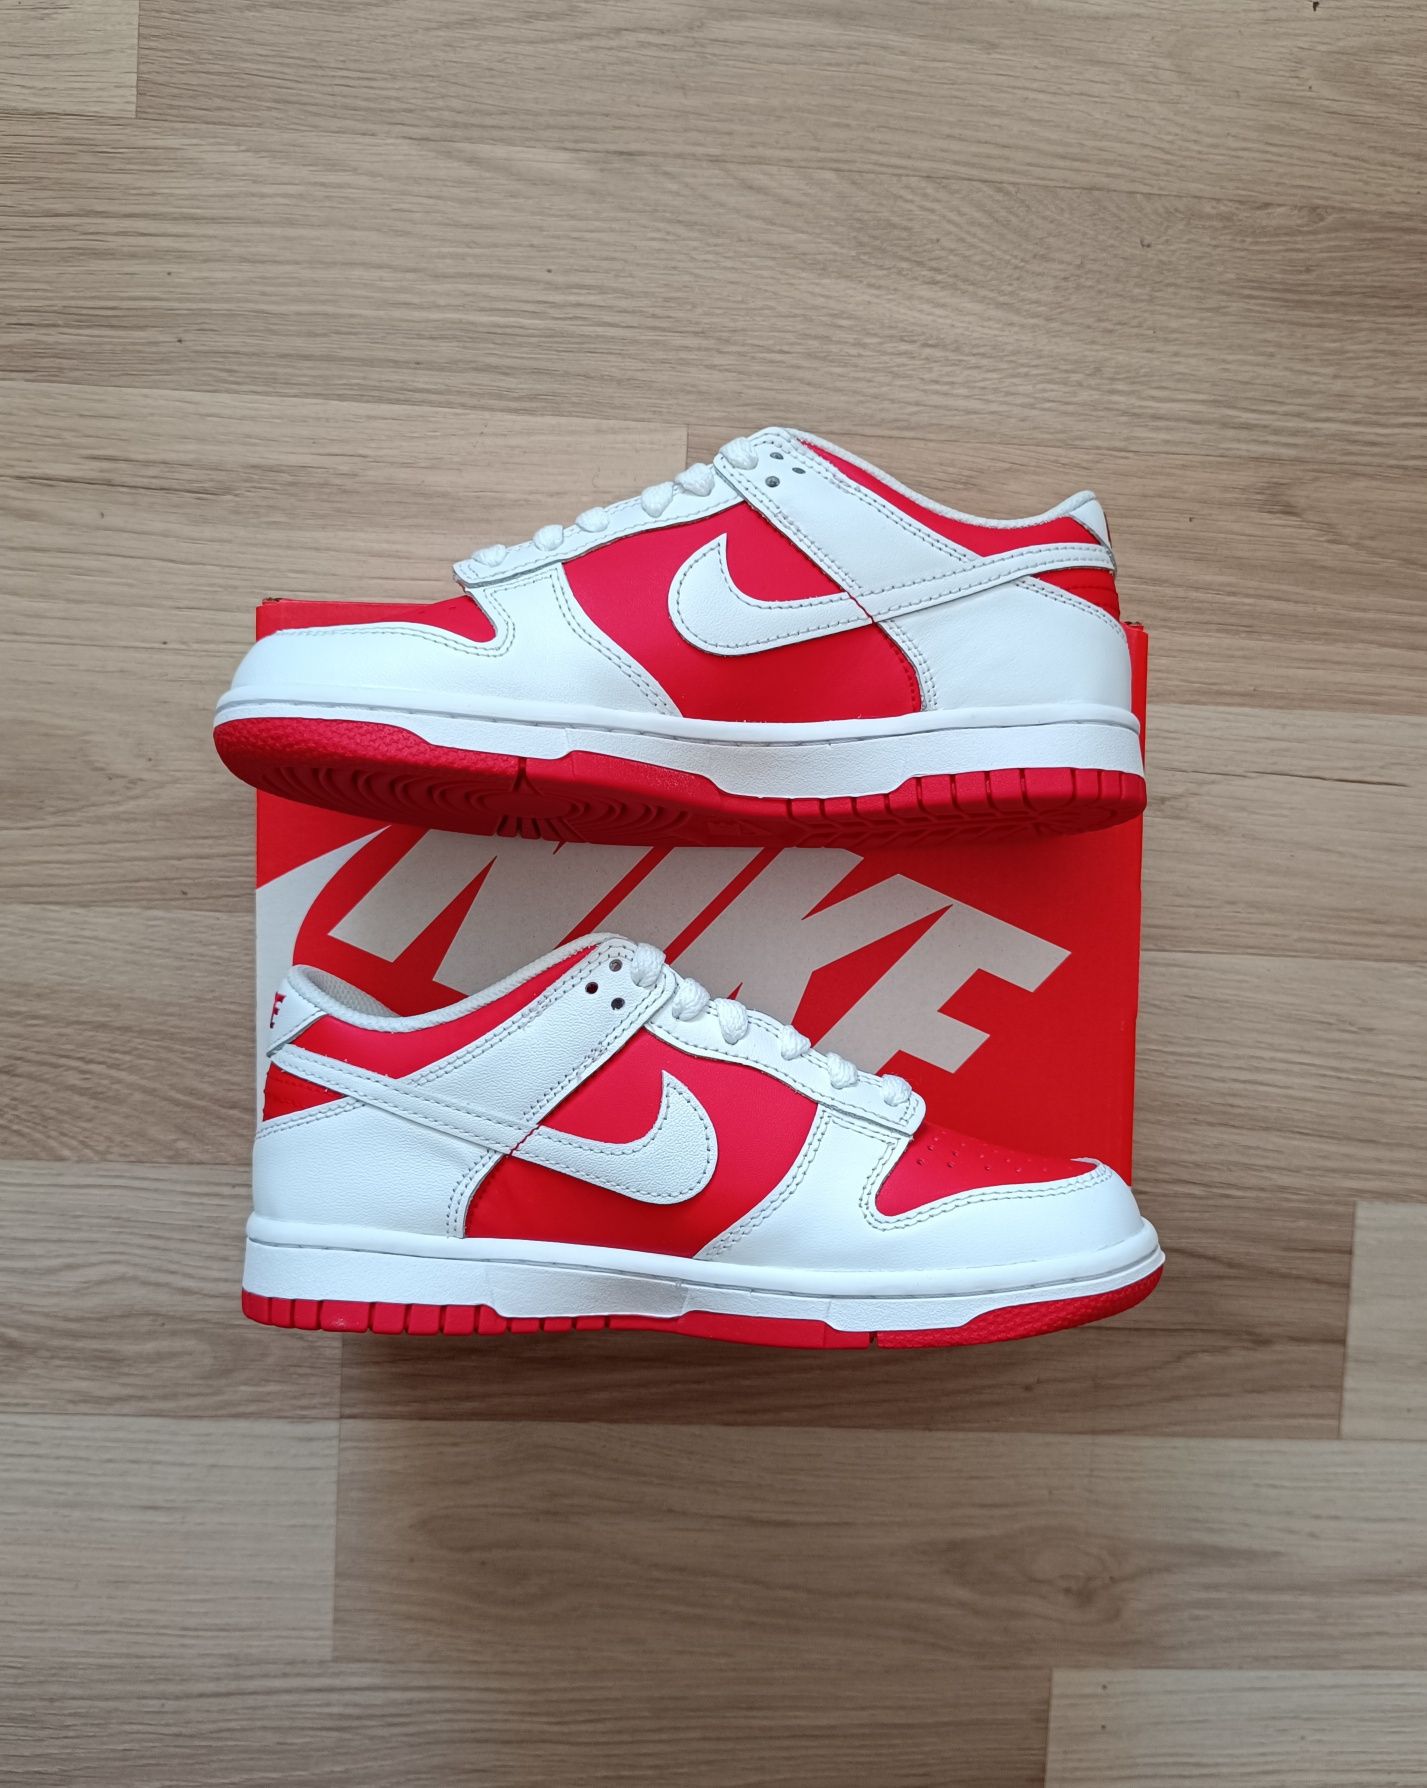 Buty damskie Nike Dunk Low Championship Red GS r. 37,5